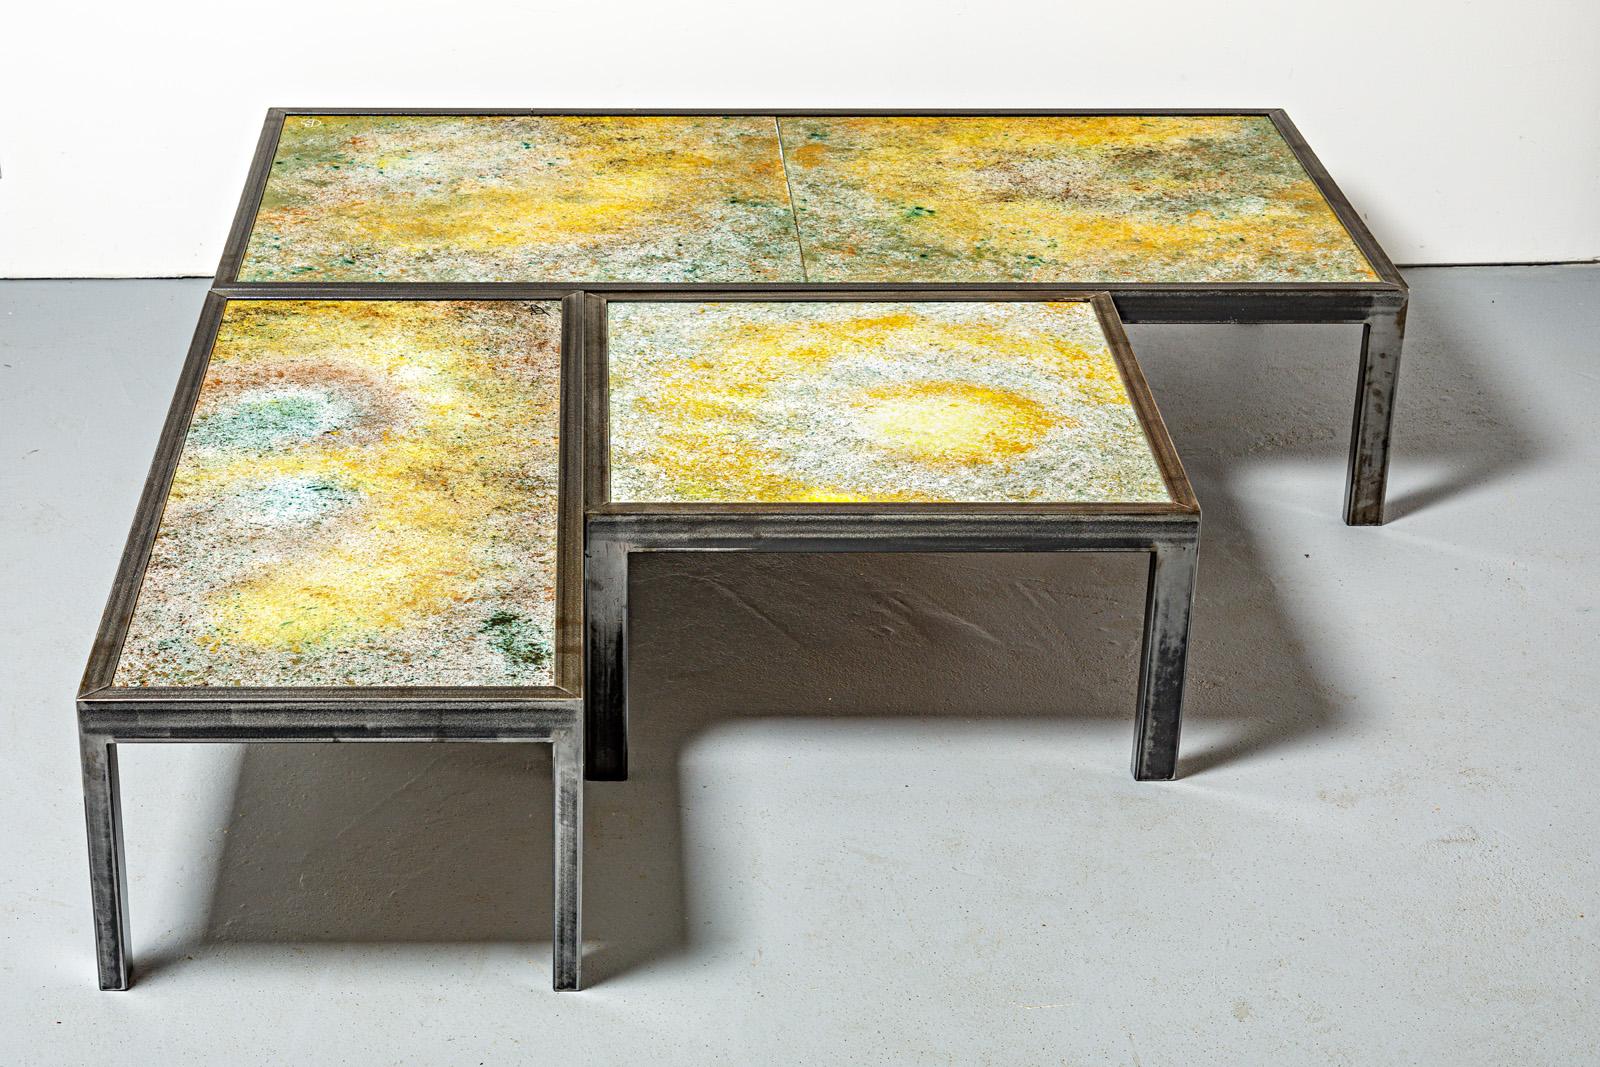 Set of 3 Large 20th Century Colored Ceramic Low Tables by Bernard Buffat 1970 For Sale 12